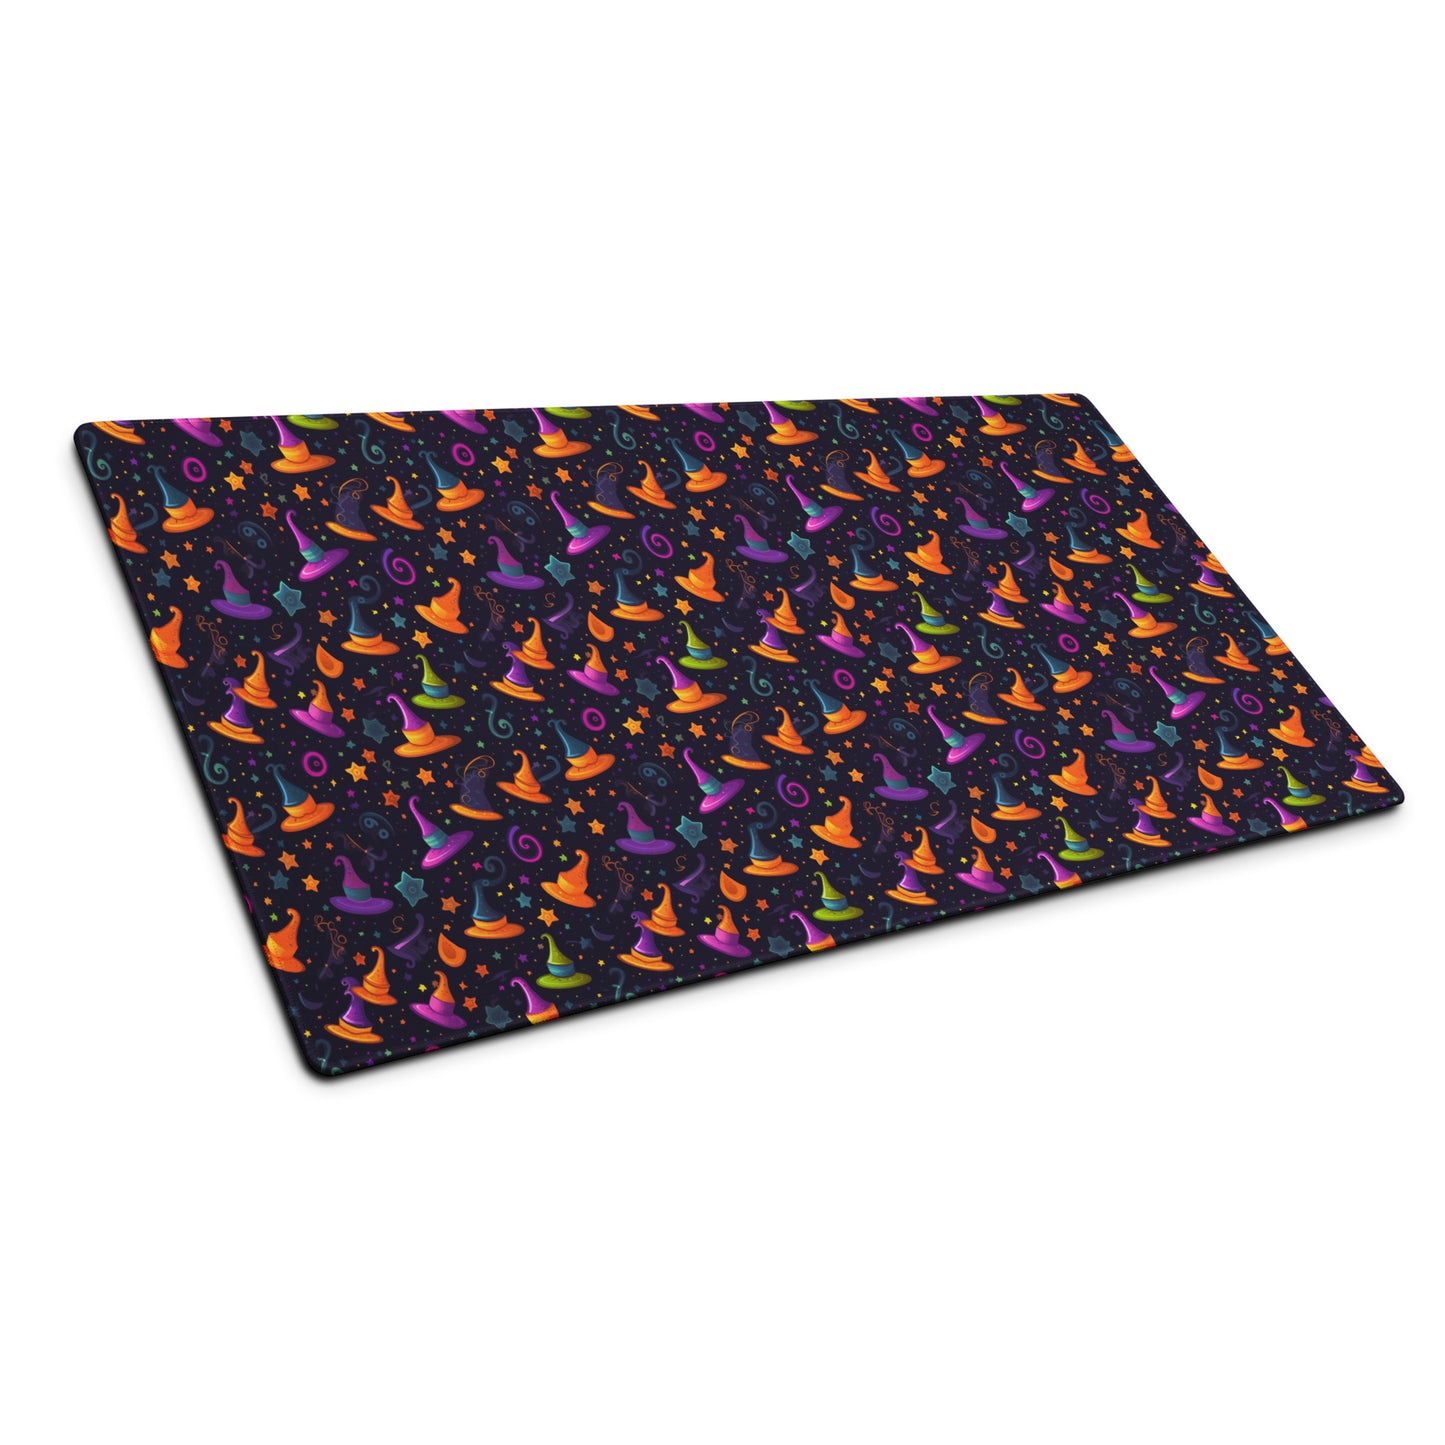 A 36" x 18" desk pad with a orange and purple wizard hat pattern sitting at an angle.